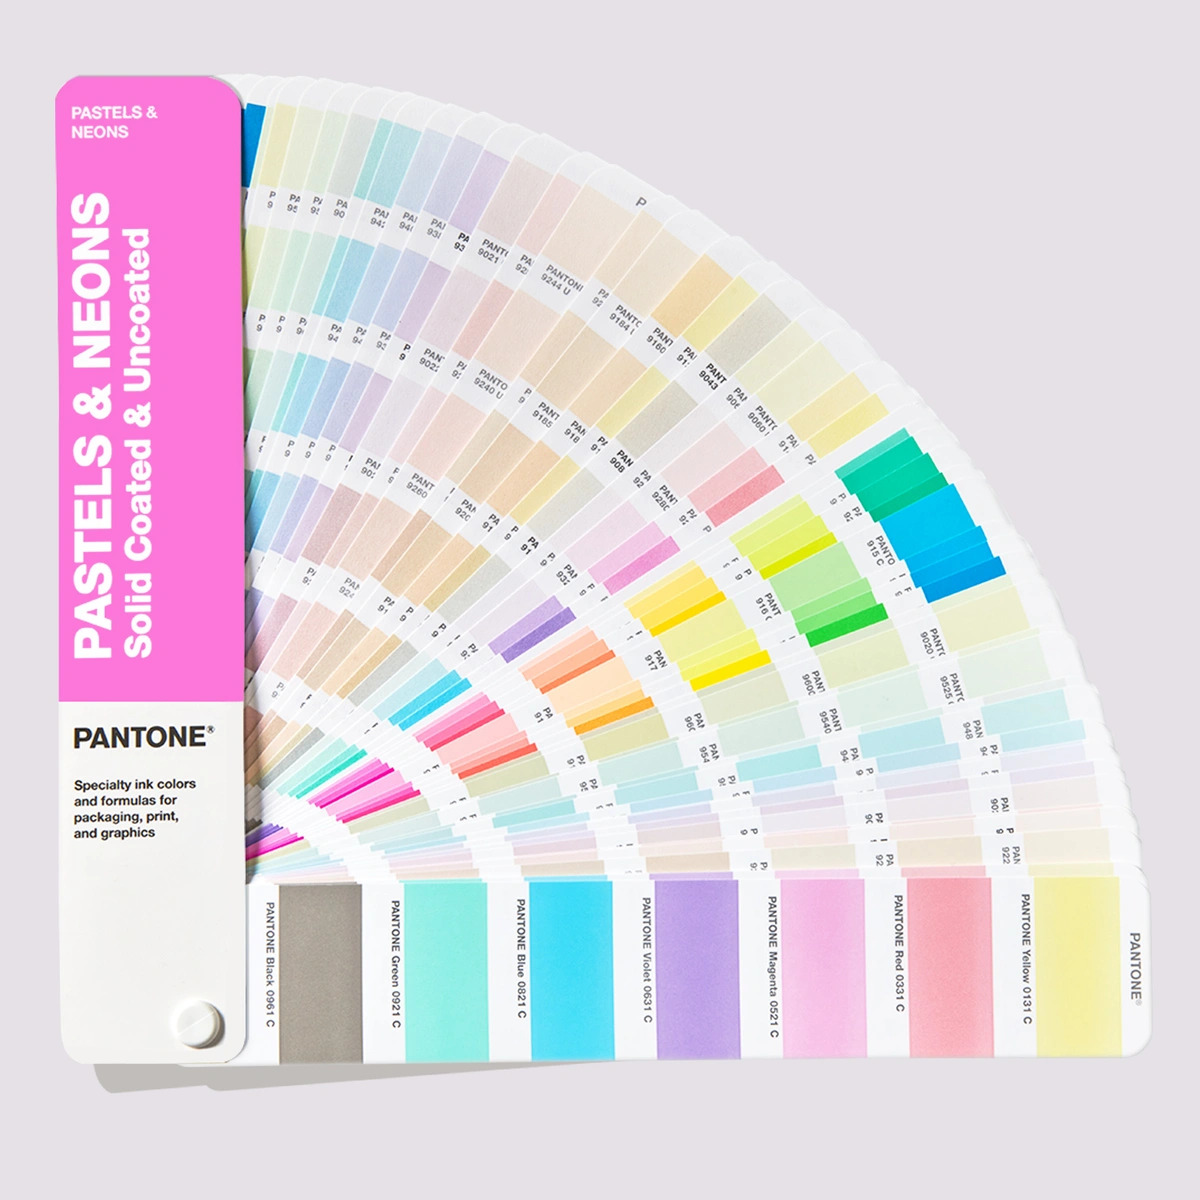 gg1504b-pantone-graphics-pastel-neons-coated-uncoated-guide-product-2_1500x1500